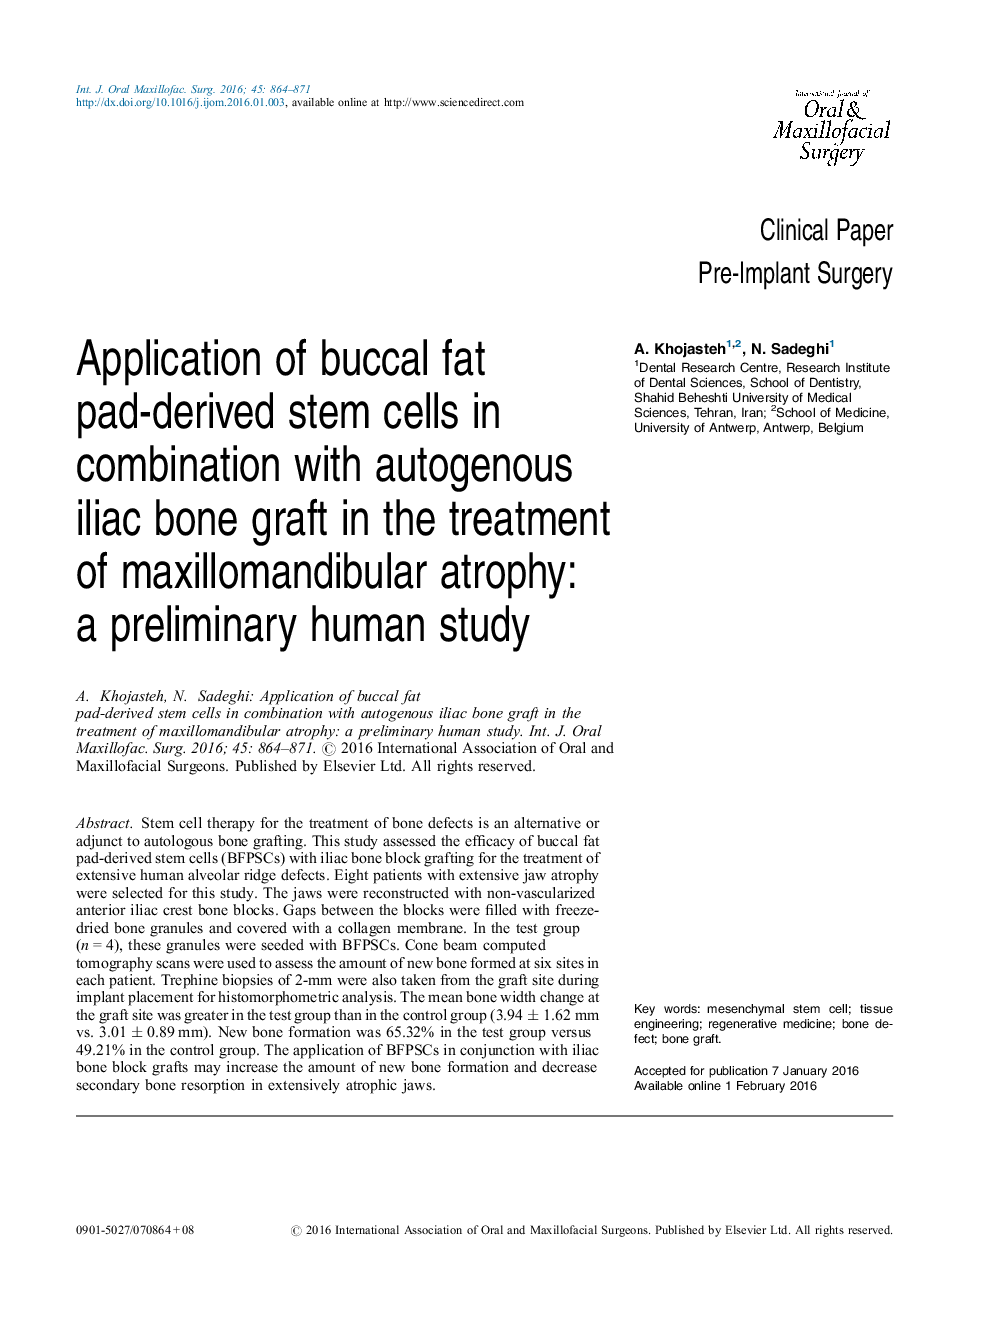 Application of buccal fat pad-derived stem cells in combination with autogenous iliac bone graft in the treatment of maxillomandibular atrophy: a preliminary human study